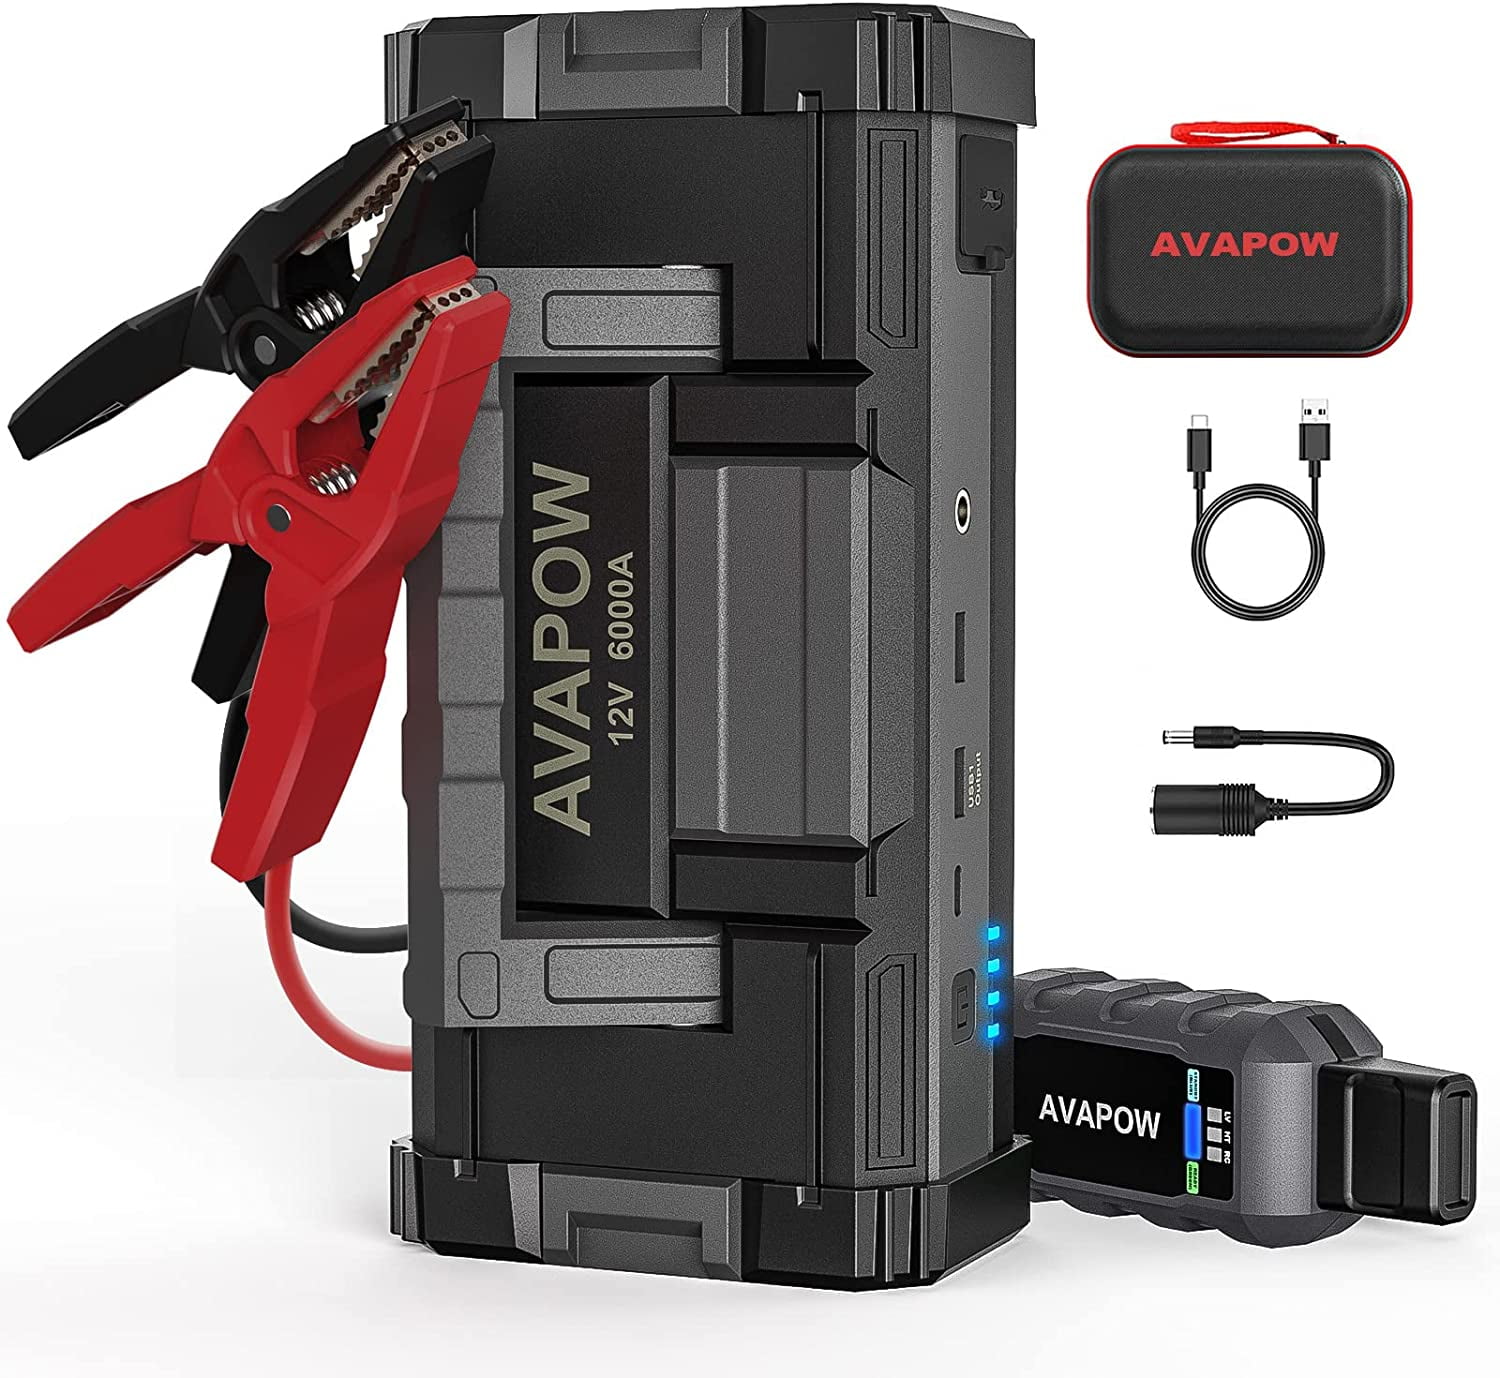 AVAPOW 6000A Car Battery Jump Starter(for All Gas or Upto 12L Diesel) Powerful Car Jump Starter with Dual USB Quick Charge and DC Output,12V Jump Pack with Built-in LED Bright Light